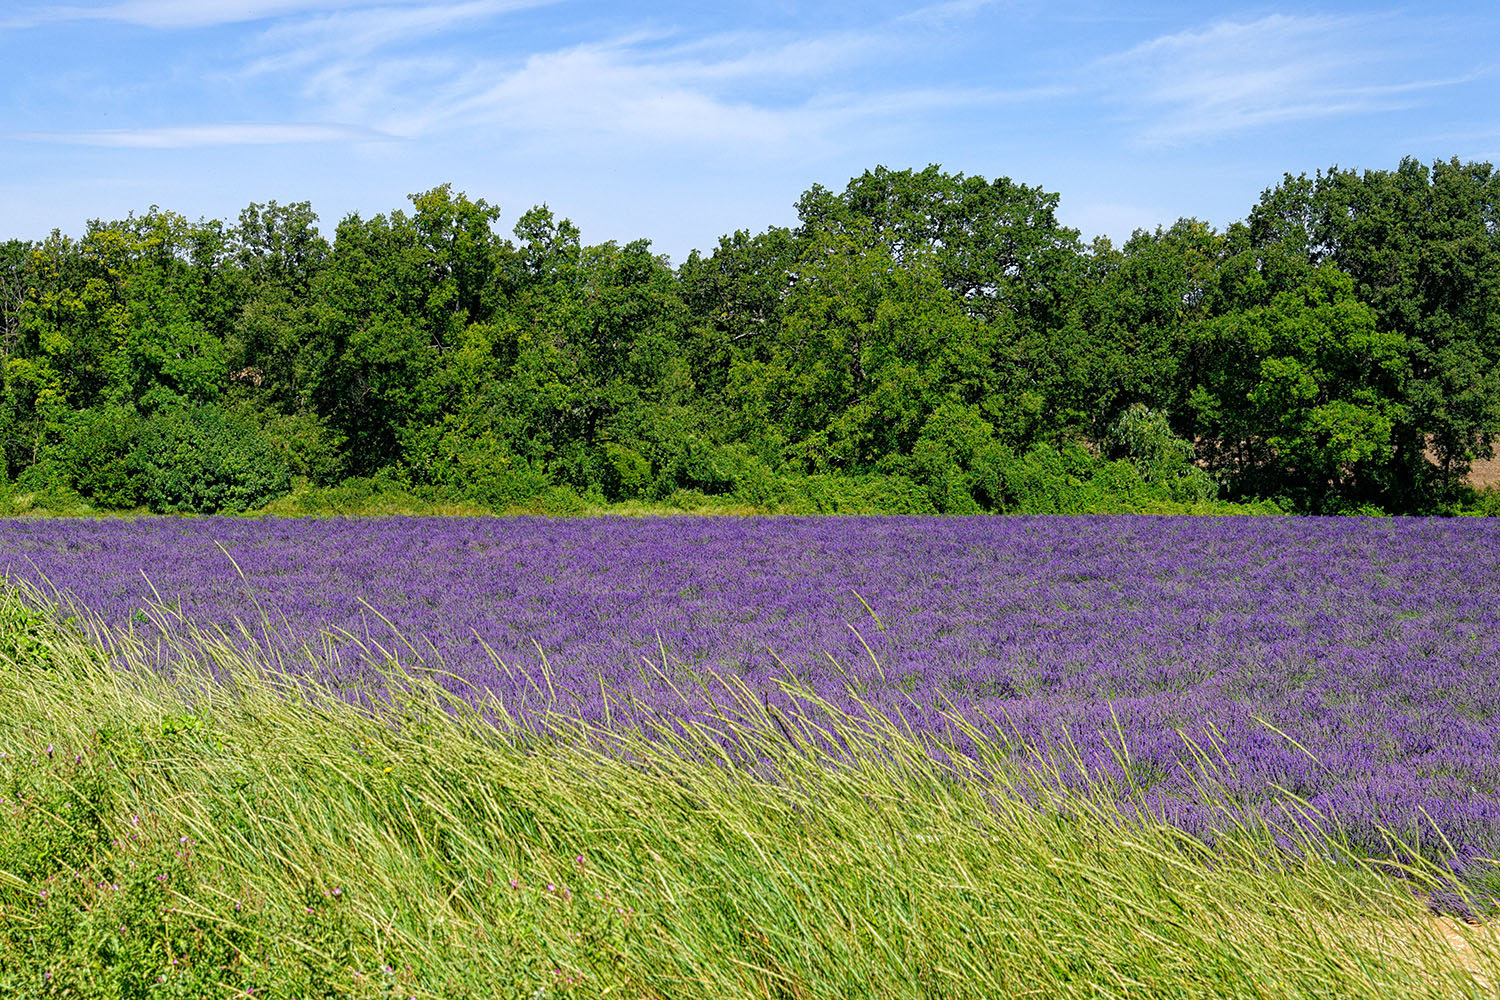 The first lavender field I saw. I drove around a curve, and there it was...